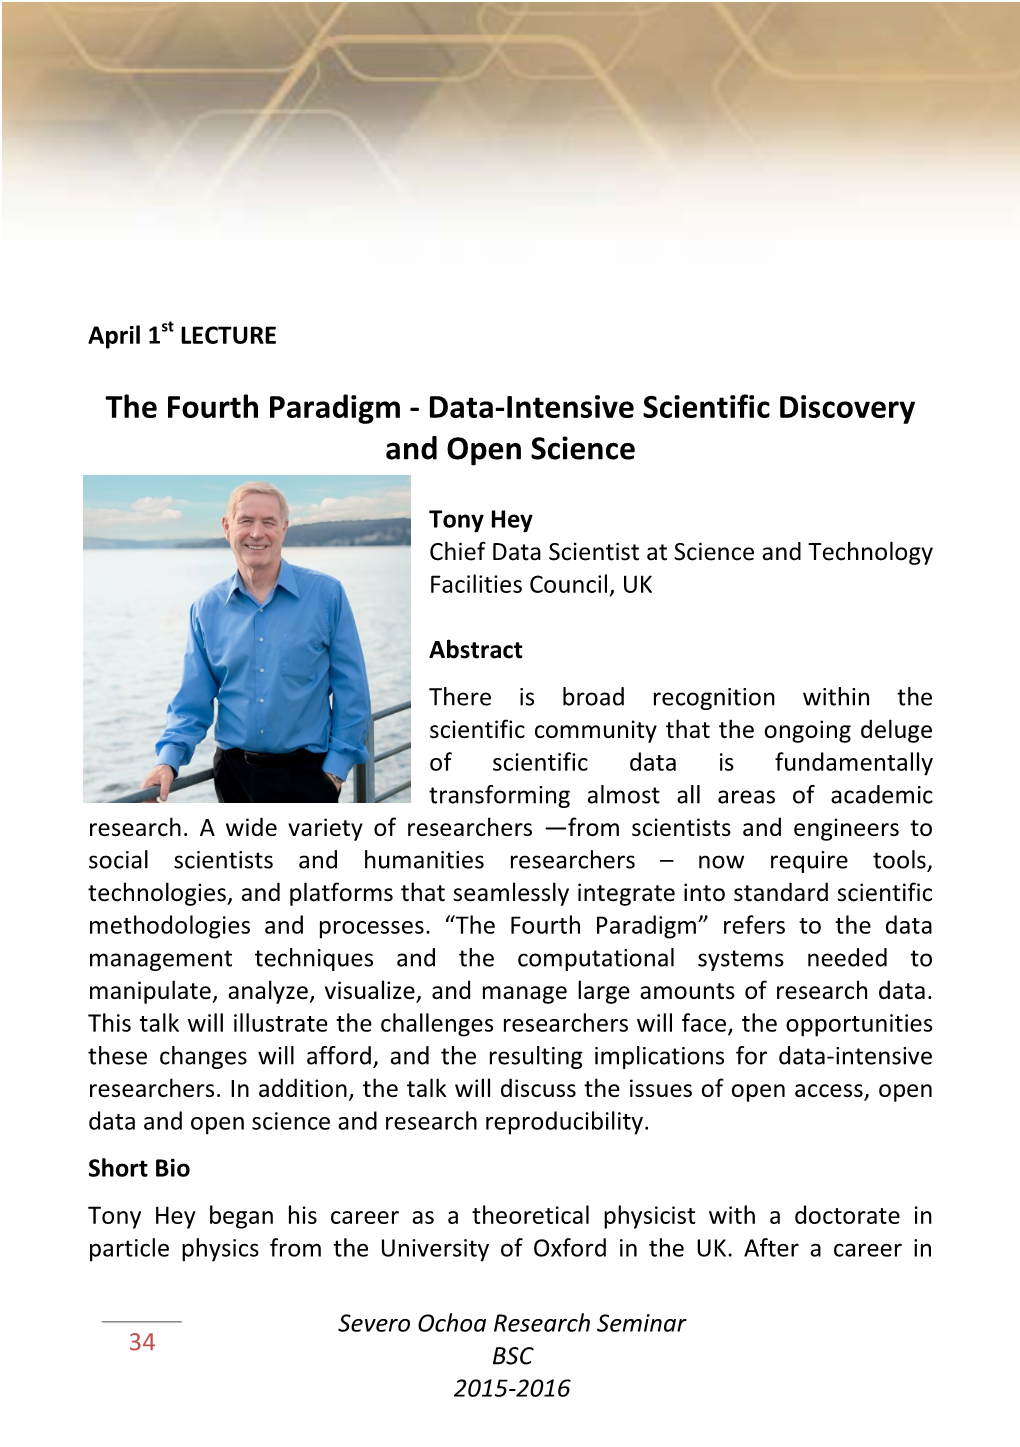 The Fourth Paradigm - Data-Intensive Scientific Discovery and Open Science